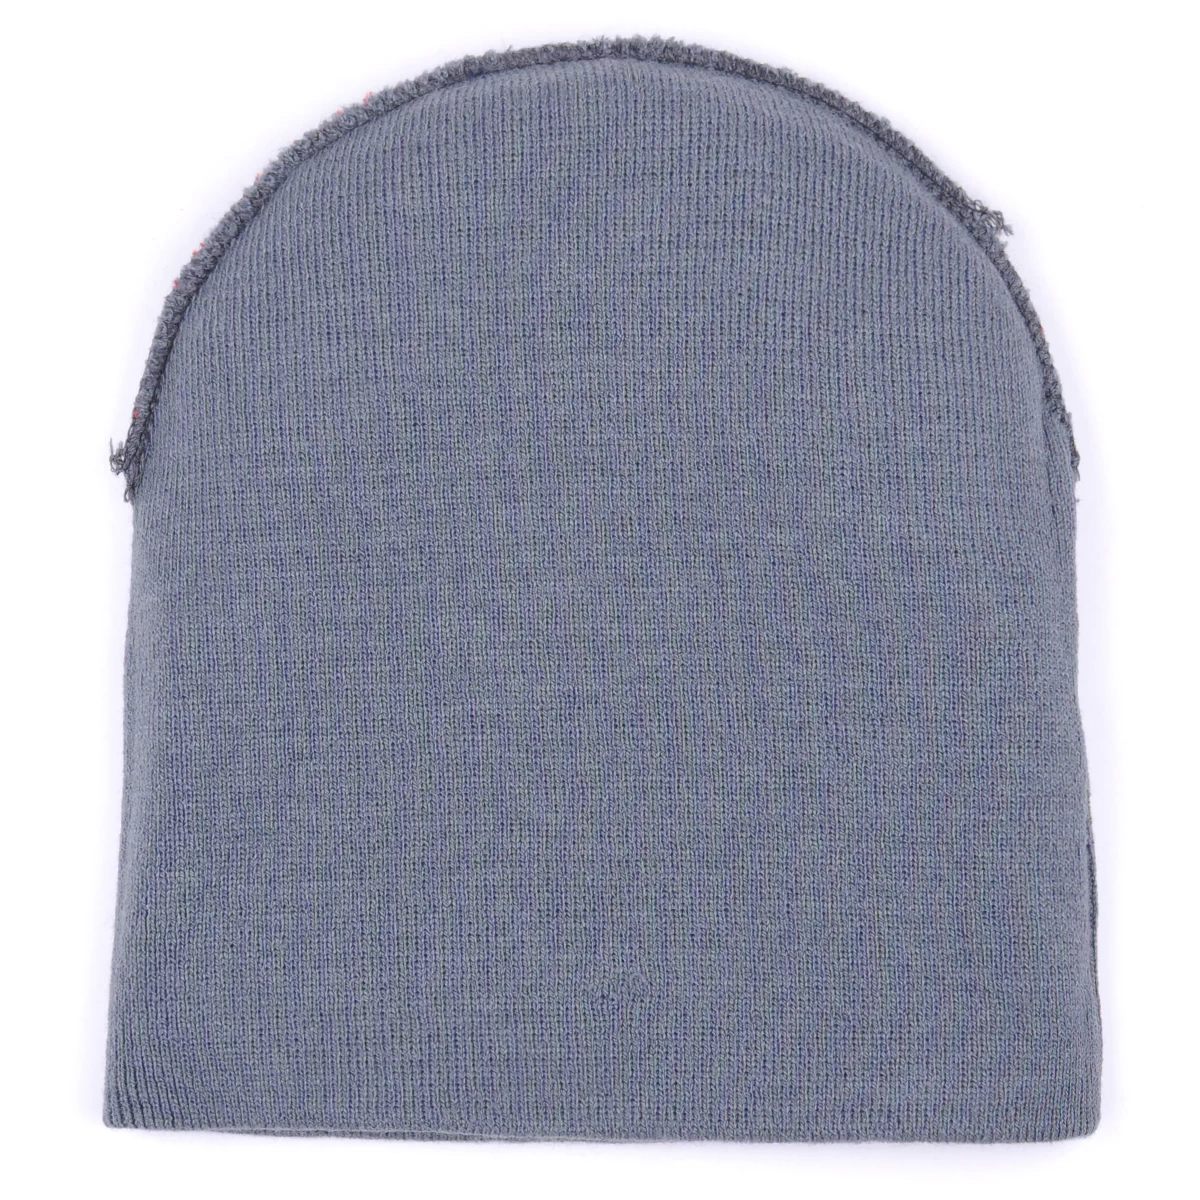 100% Acrylic Jacquard Beanie Winter Hat Knitted Cap Knitted Hat